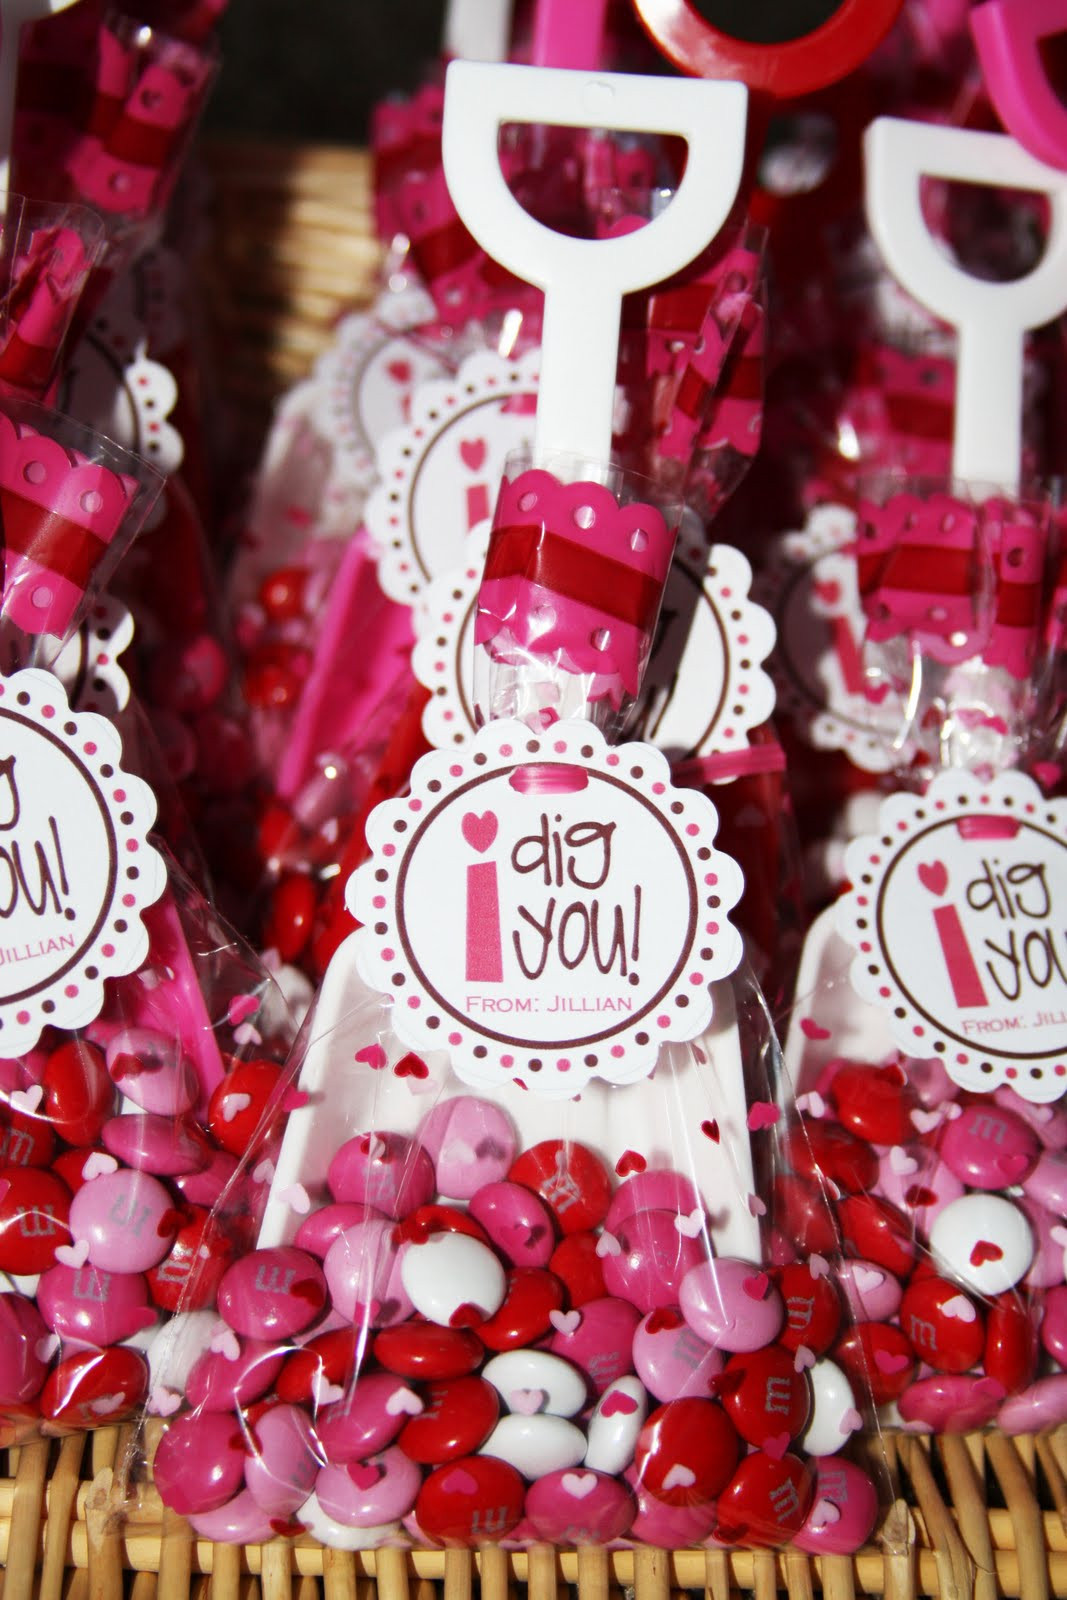 Valentine Gift Bags Ideas
 Cute Food For Kids Valentine s Day Treat Bag Ideas